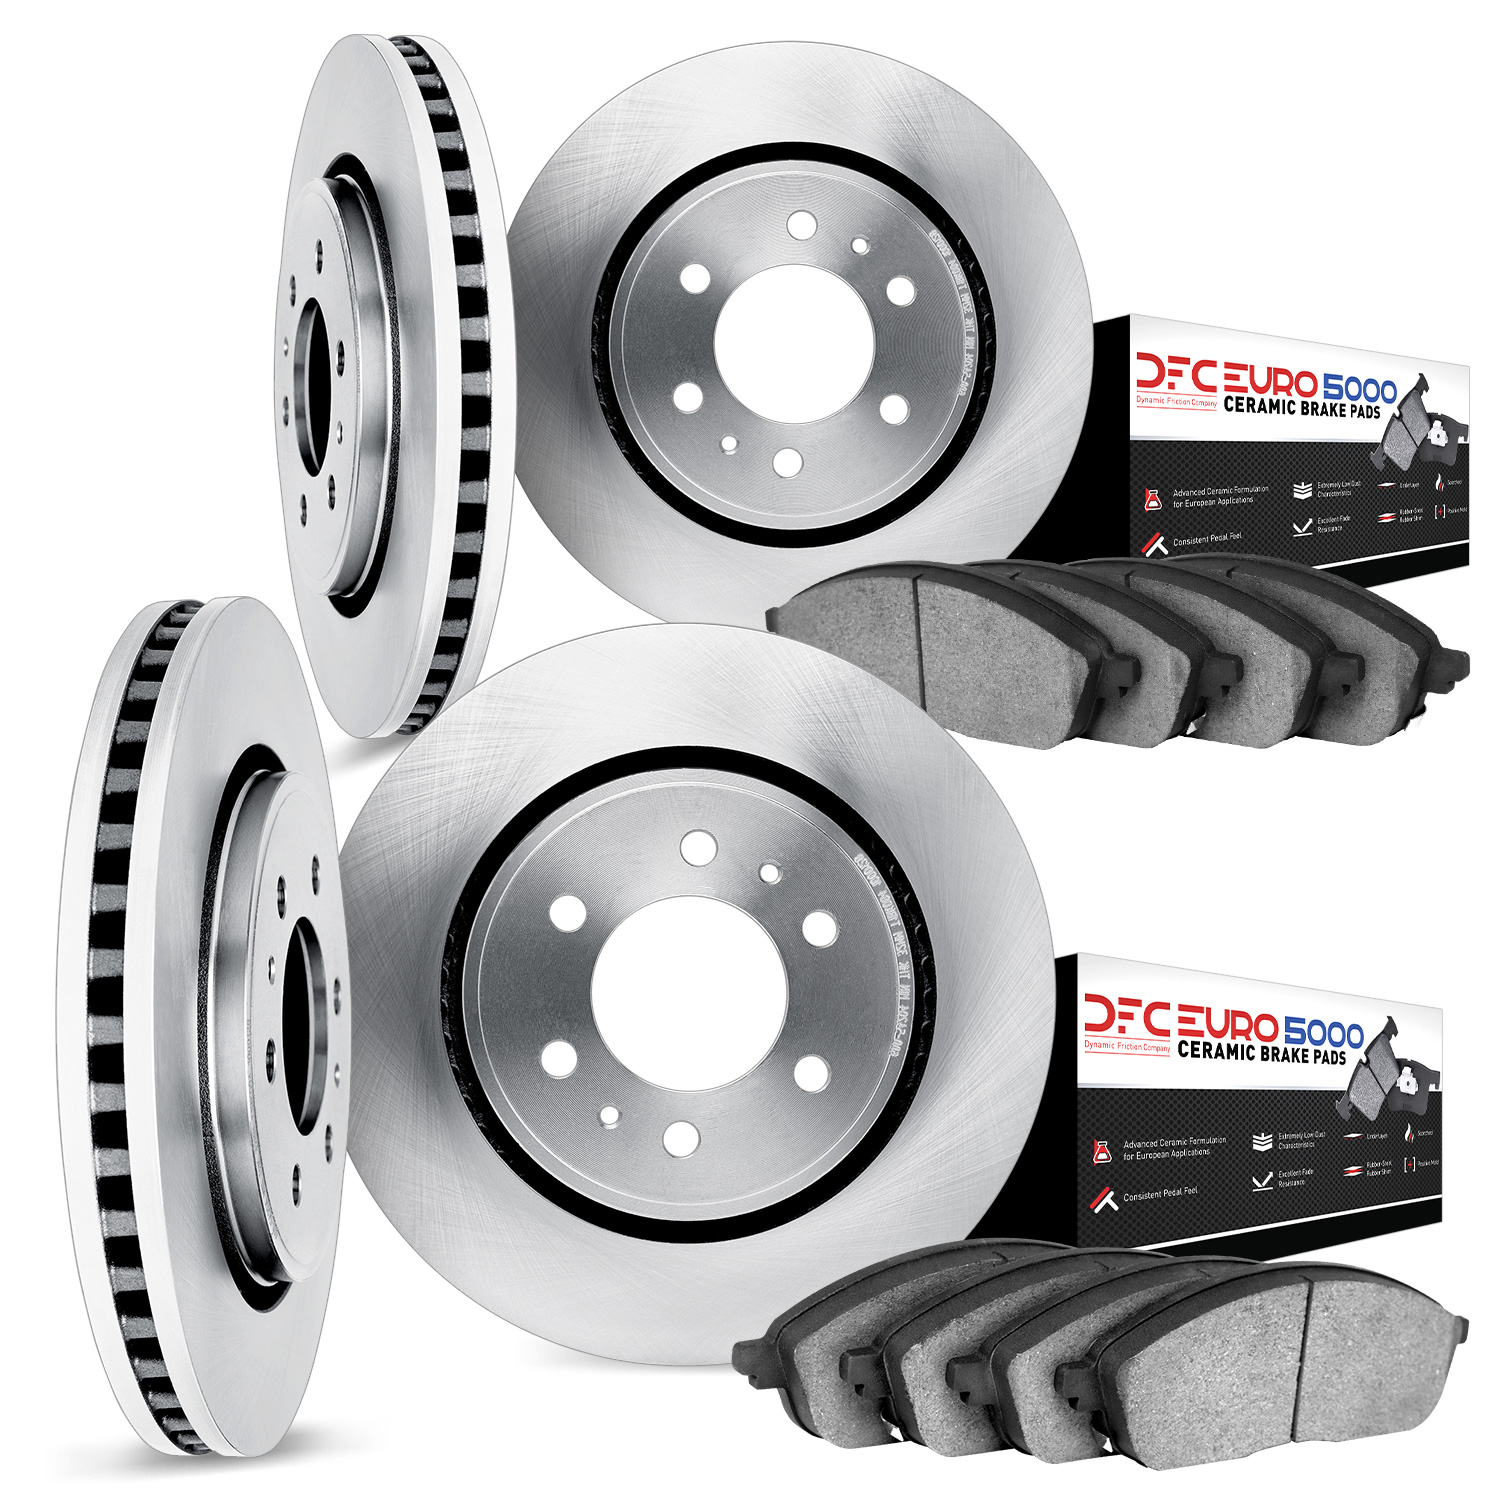 6604-10993 Brake Rotors w/5000 Euro Ceramic Brake Pads, 2004-2009 GM, Position: Front and Rear